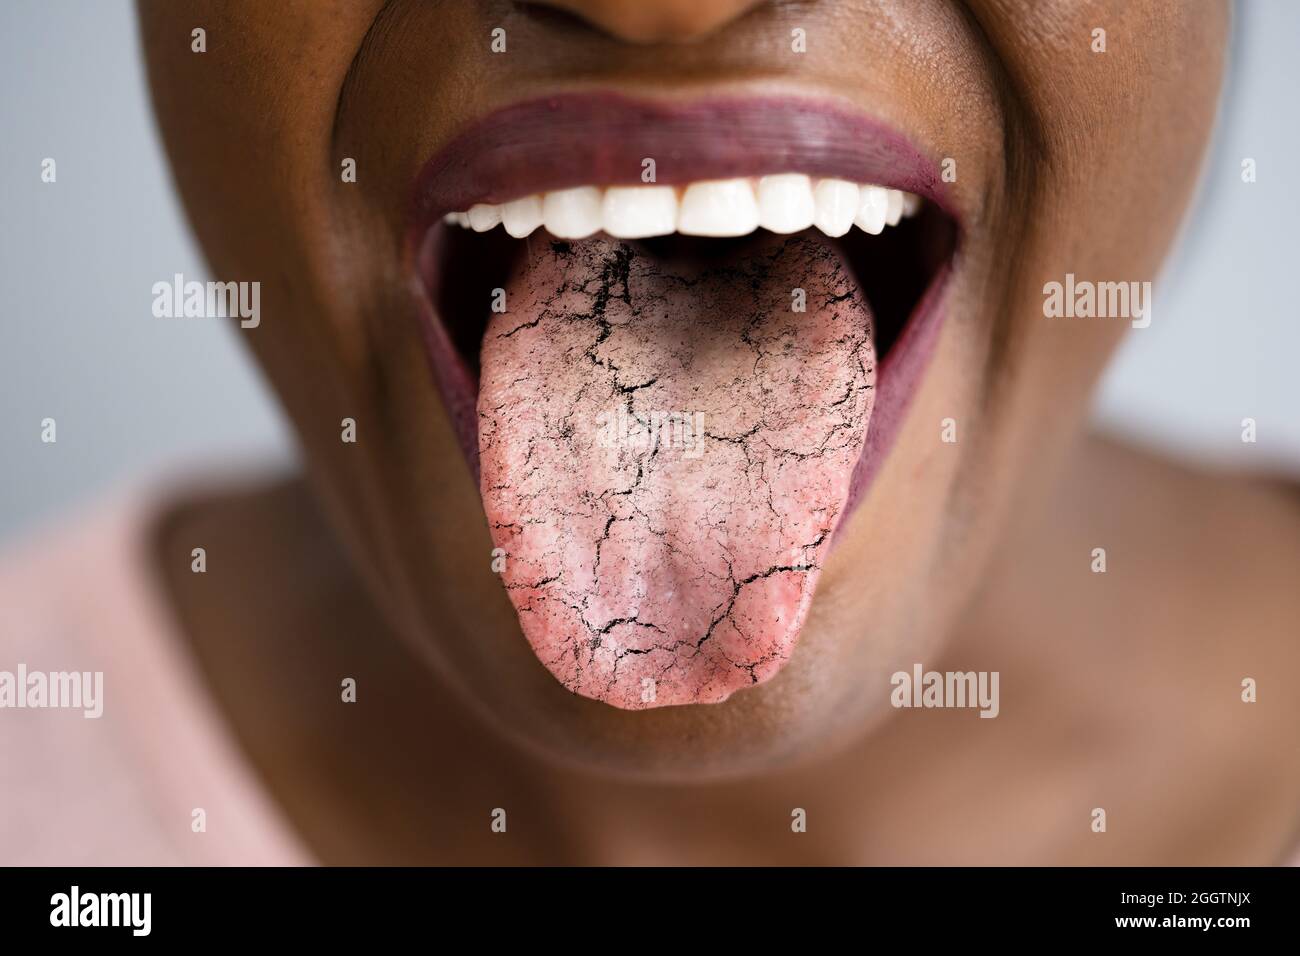 Woman Tongue With Bad Bacteria Candidiasis And Pain Stock Photo